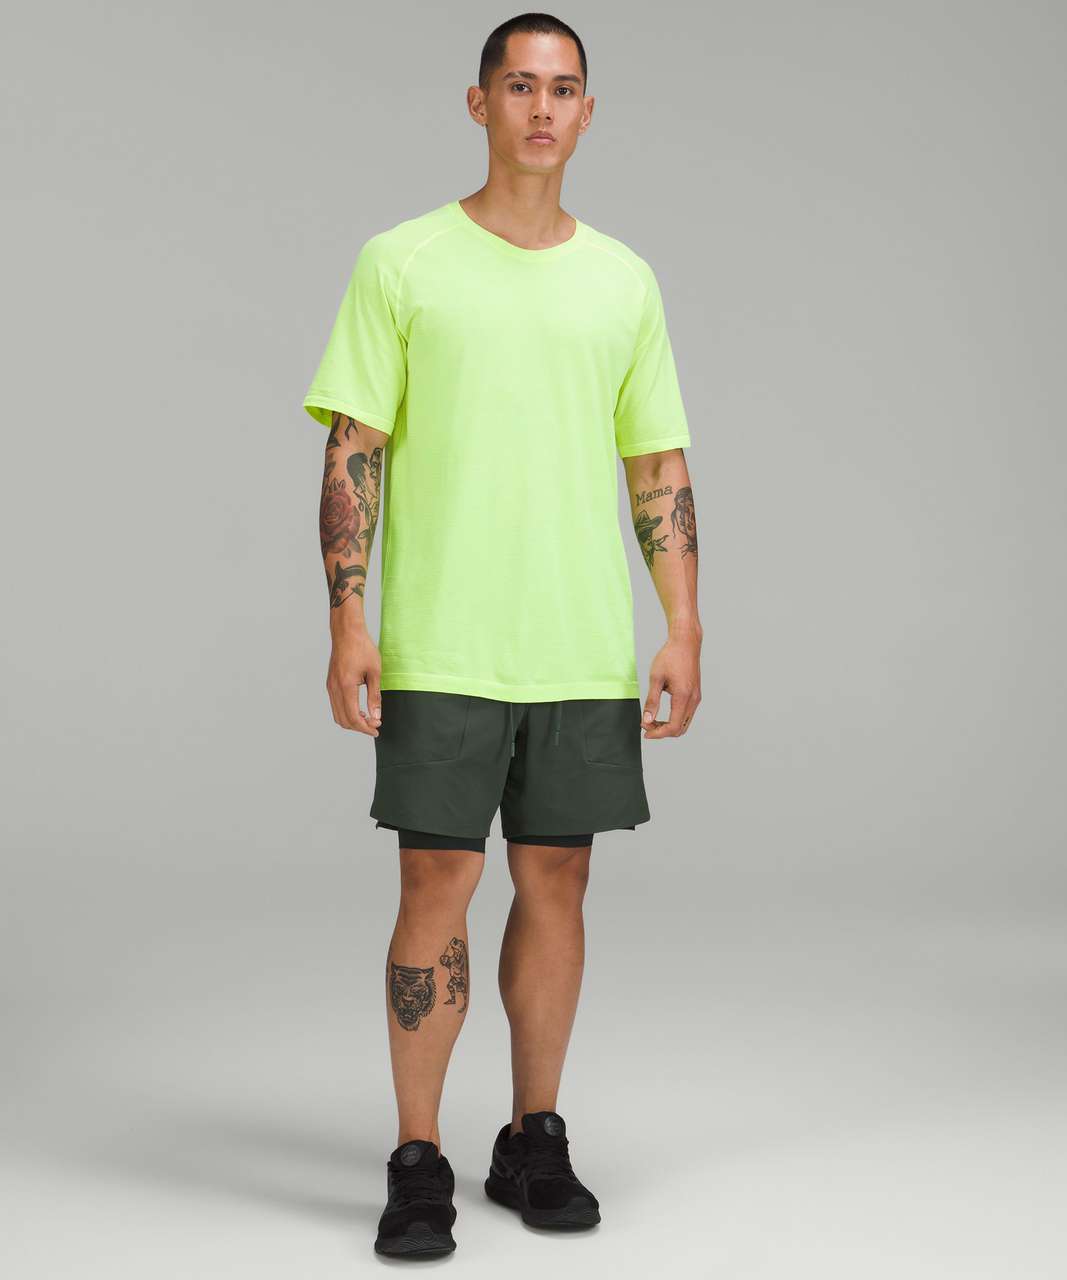 Lululemon License to Train Lined Short 7" - Smoked Spruce